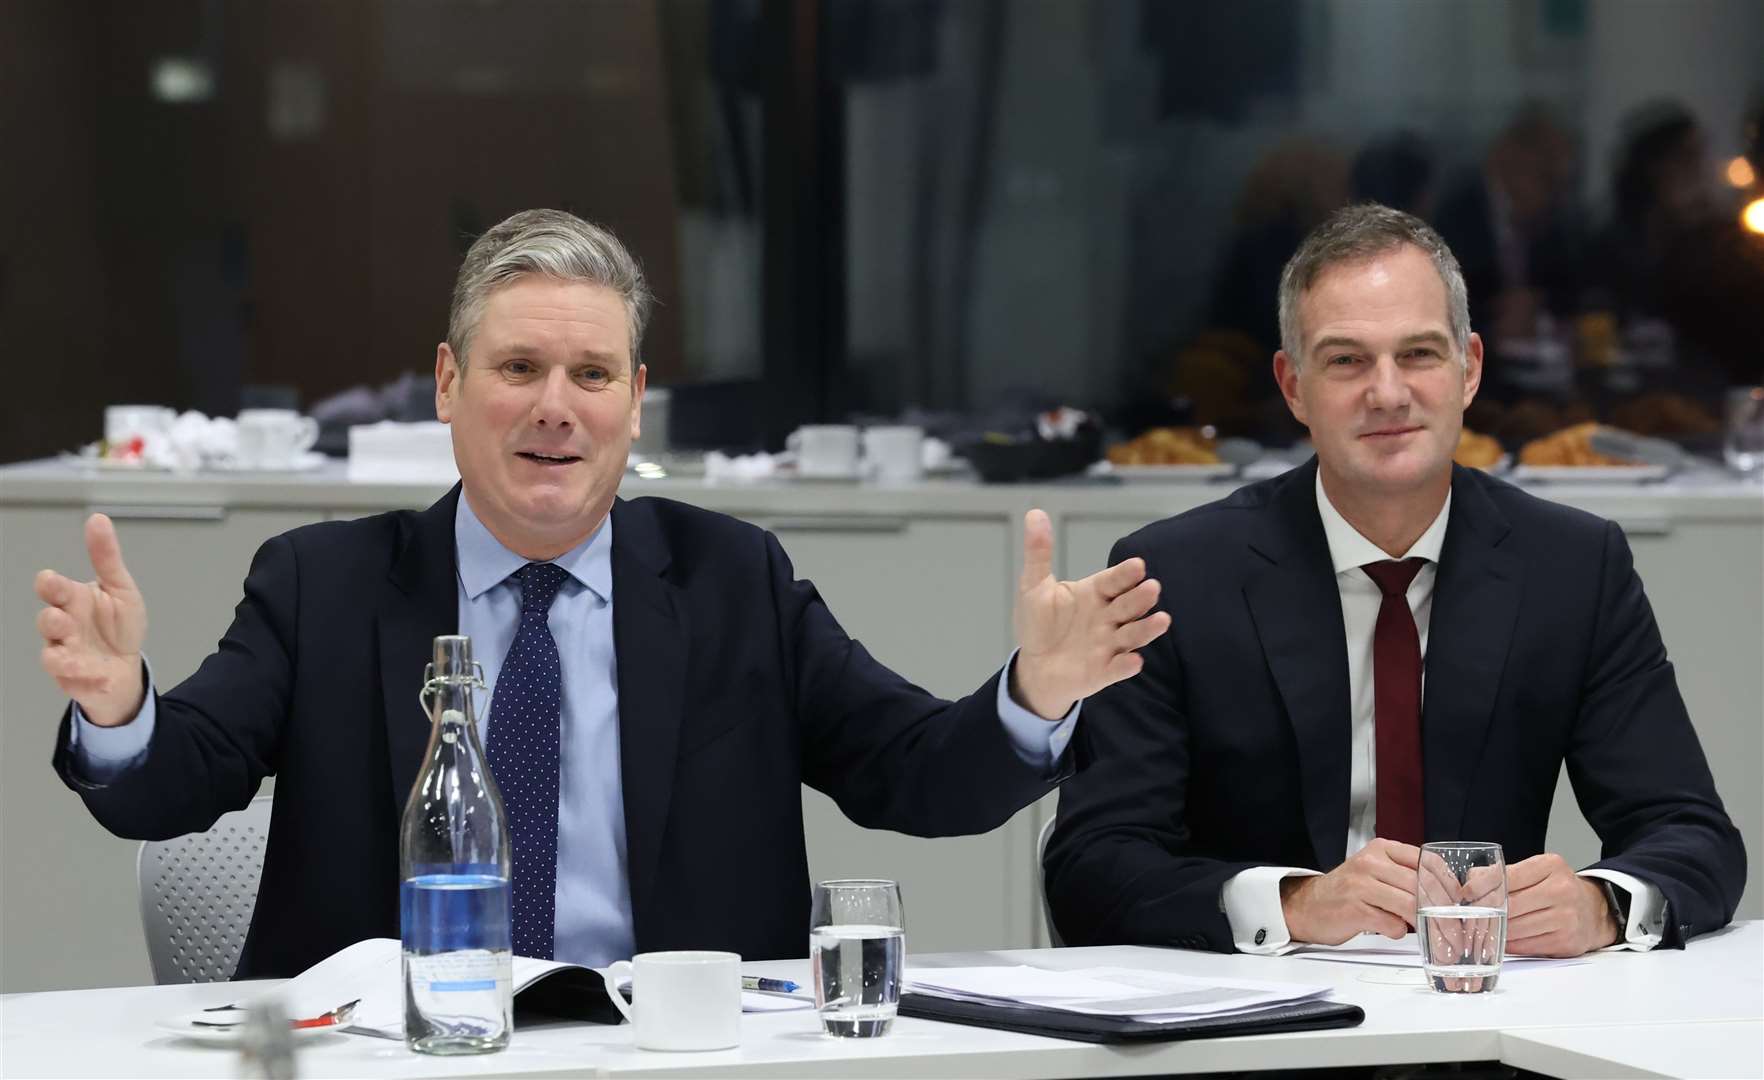 Labour leader Sir Keir Starmer, left, and Peter Kyle, shadow secretary of state for Northern Ireland, during a Brexit Business Working Group breakfast at KPMG offices in Belfast (Liam McBurney/PA)